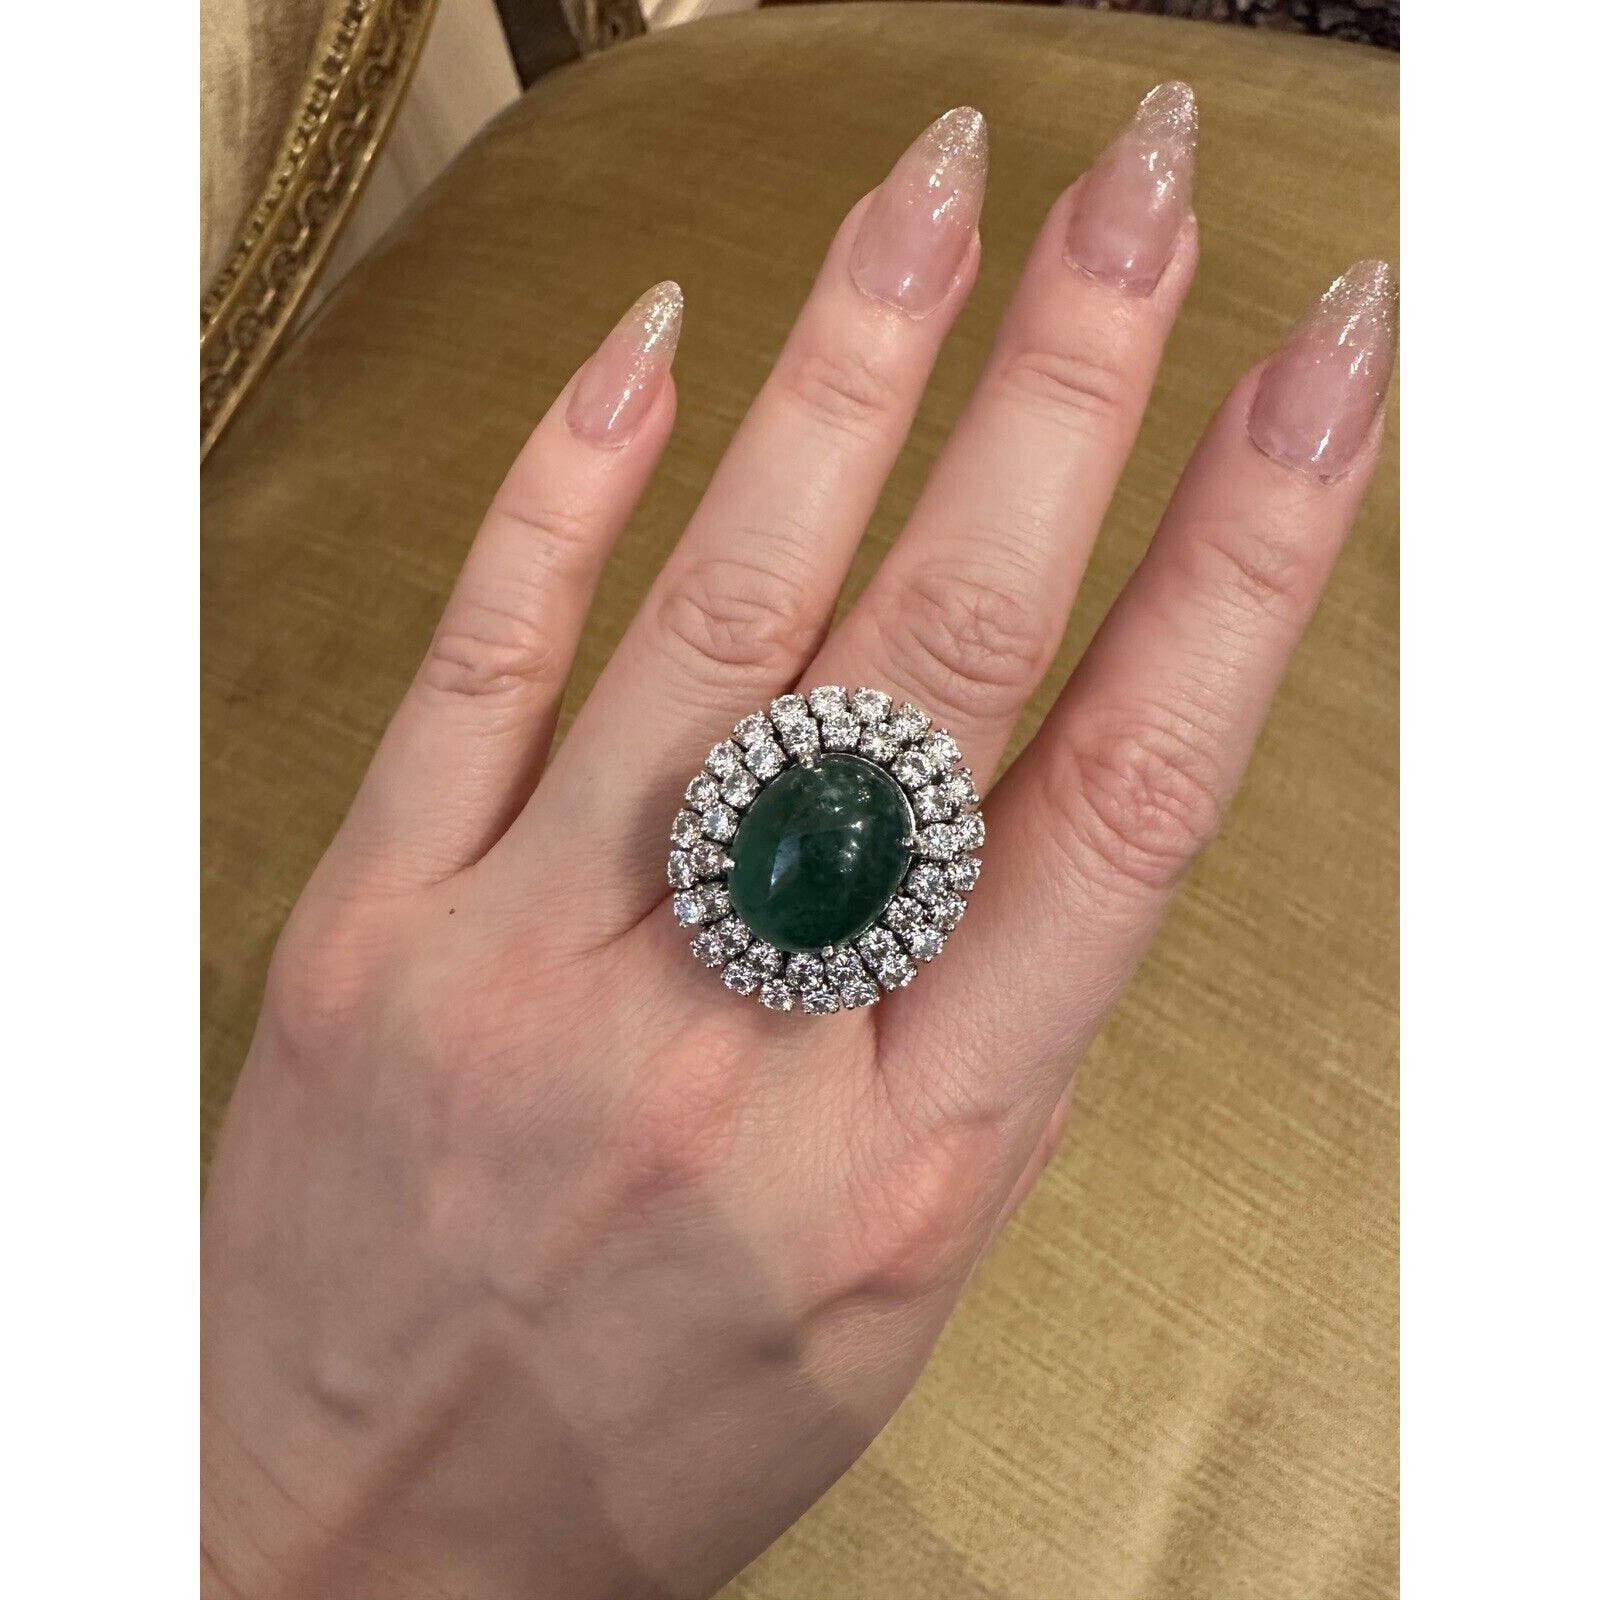 GIA 11.67 ct Natural Emerald Cabochon & Diamond Ring in 18k White Gold - HM2402